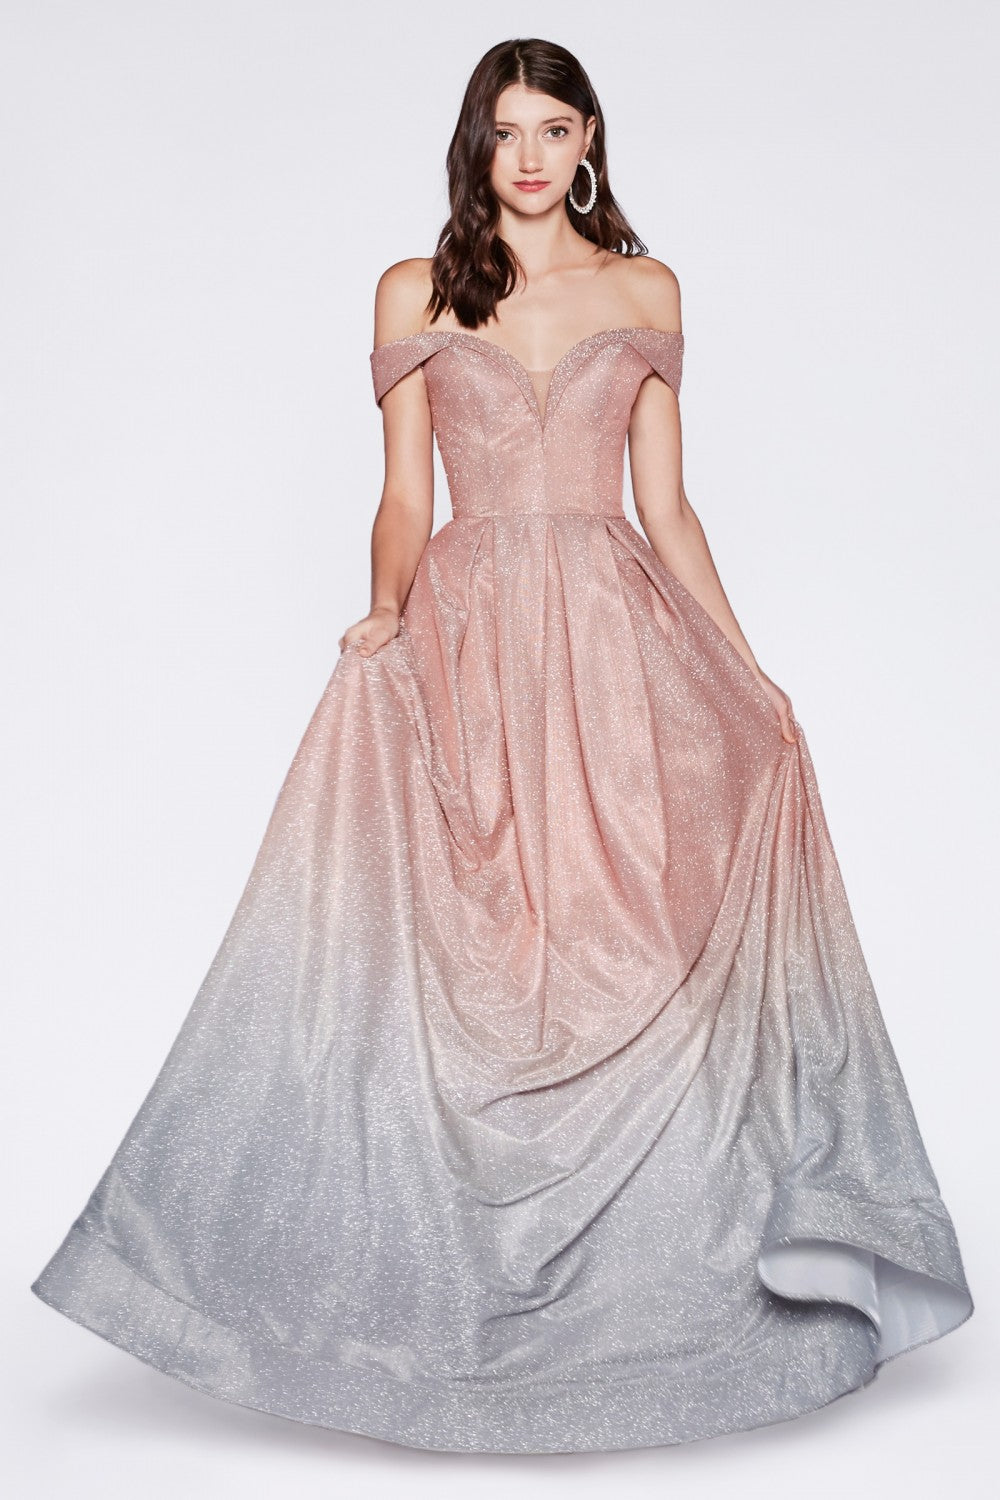 Gradient A-line Glitter Prom Ball gown-smcdress